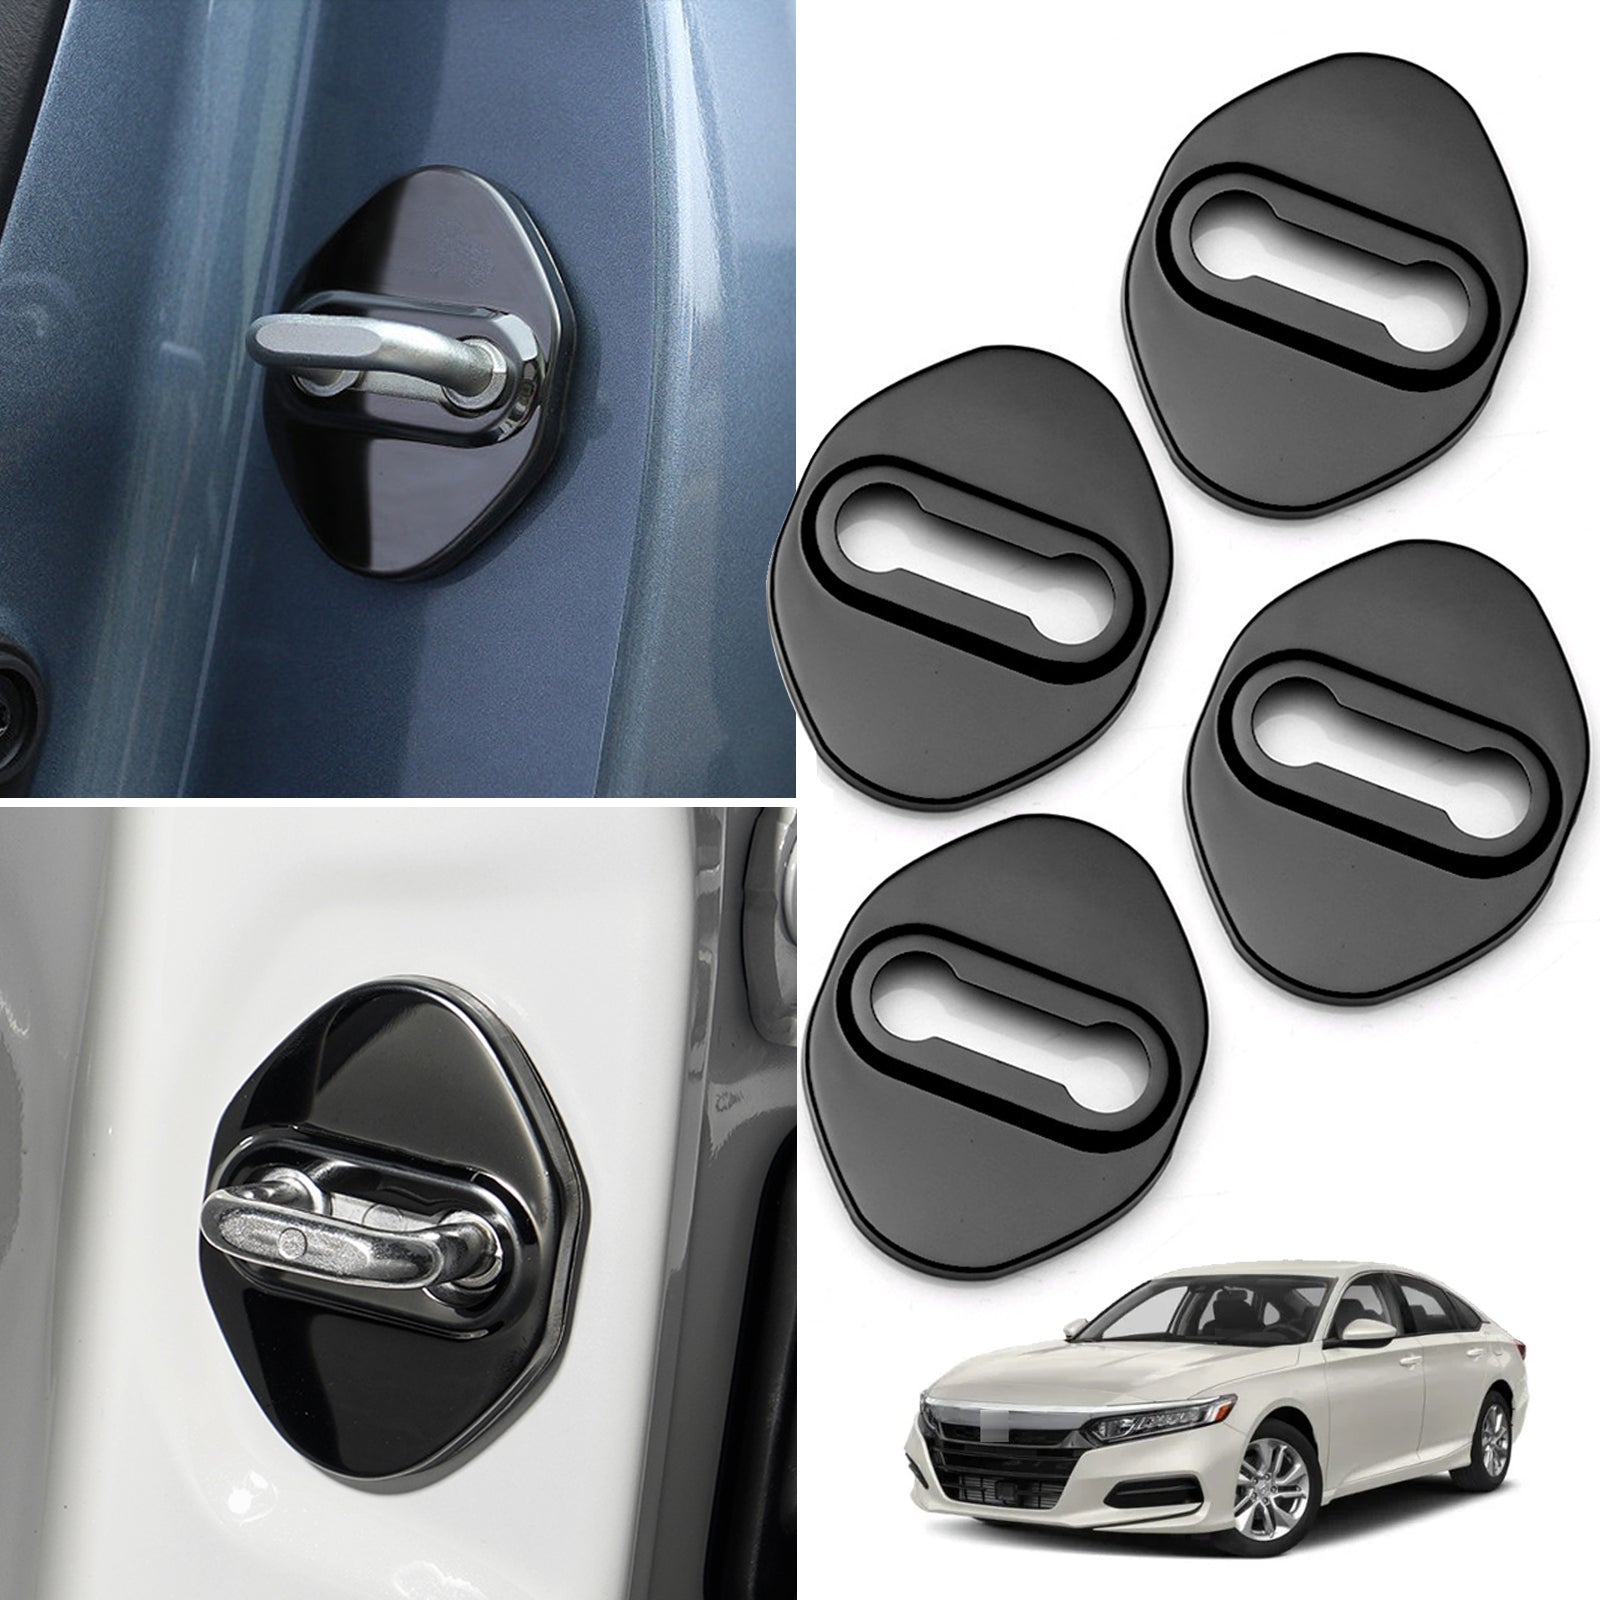 Black Stainless Steel Car Door Lock Cover Protector Trims 4pcs for Hon